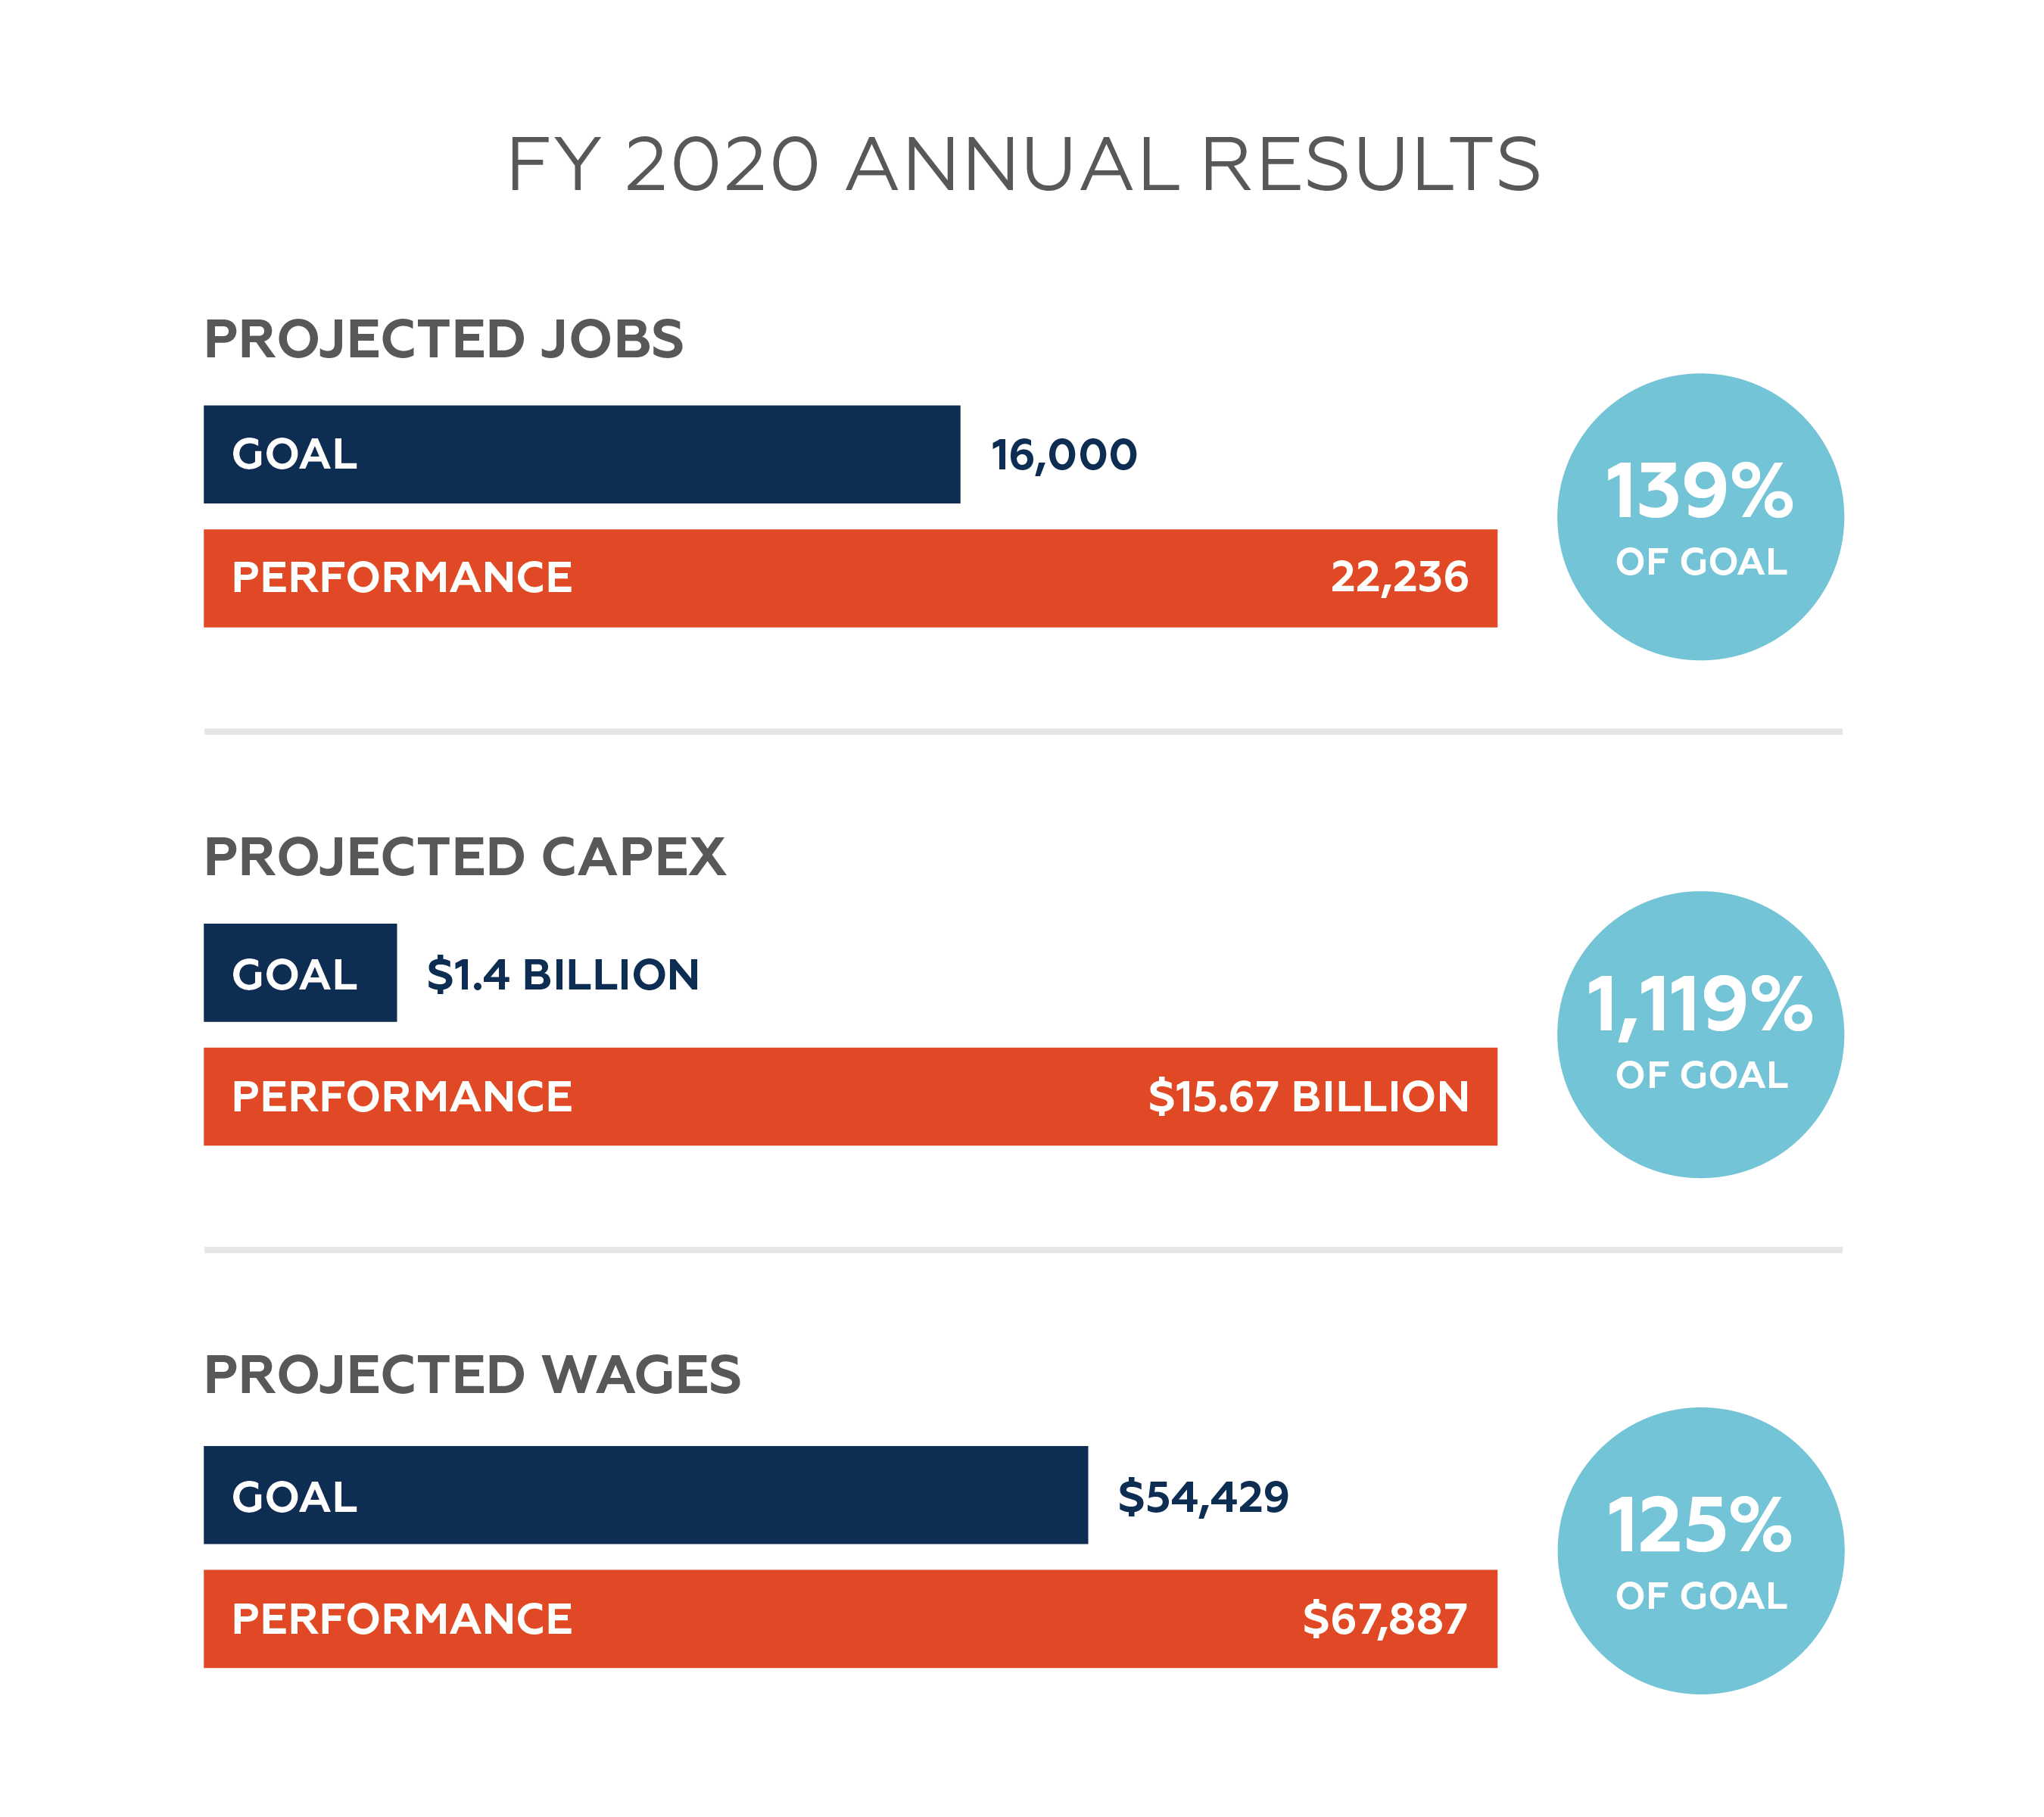 FY20 annual results